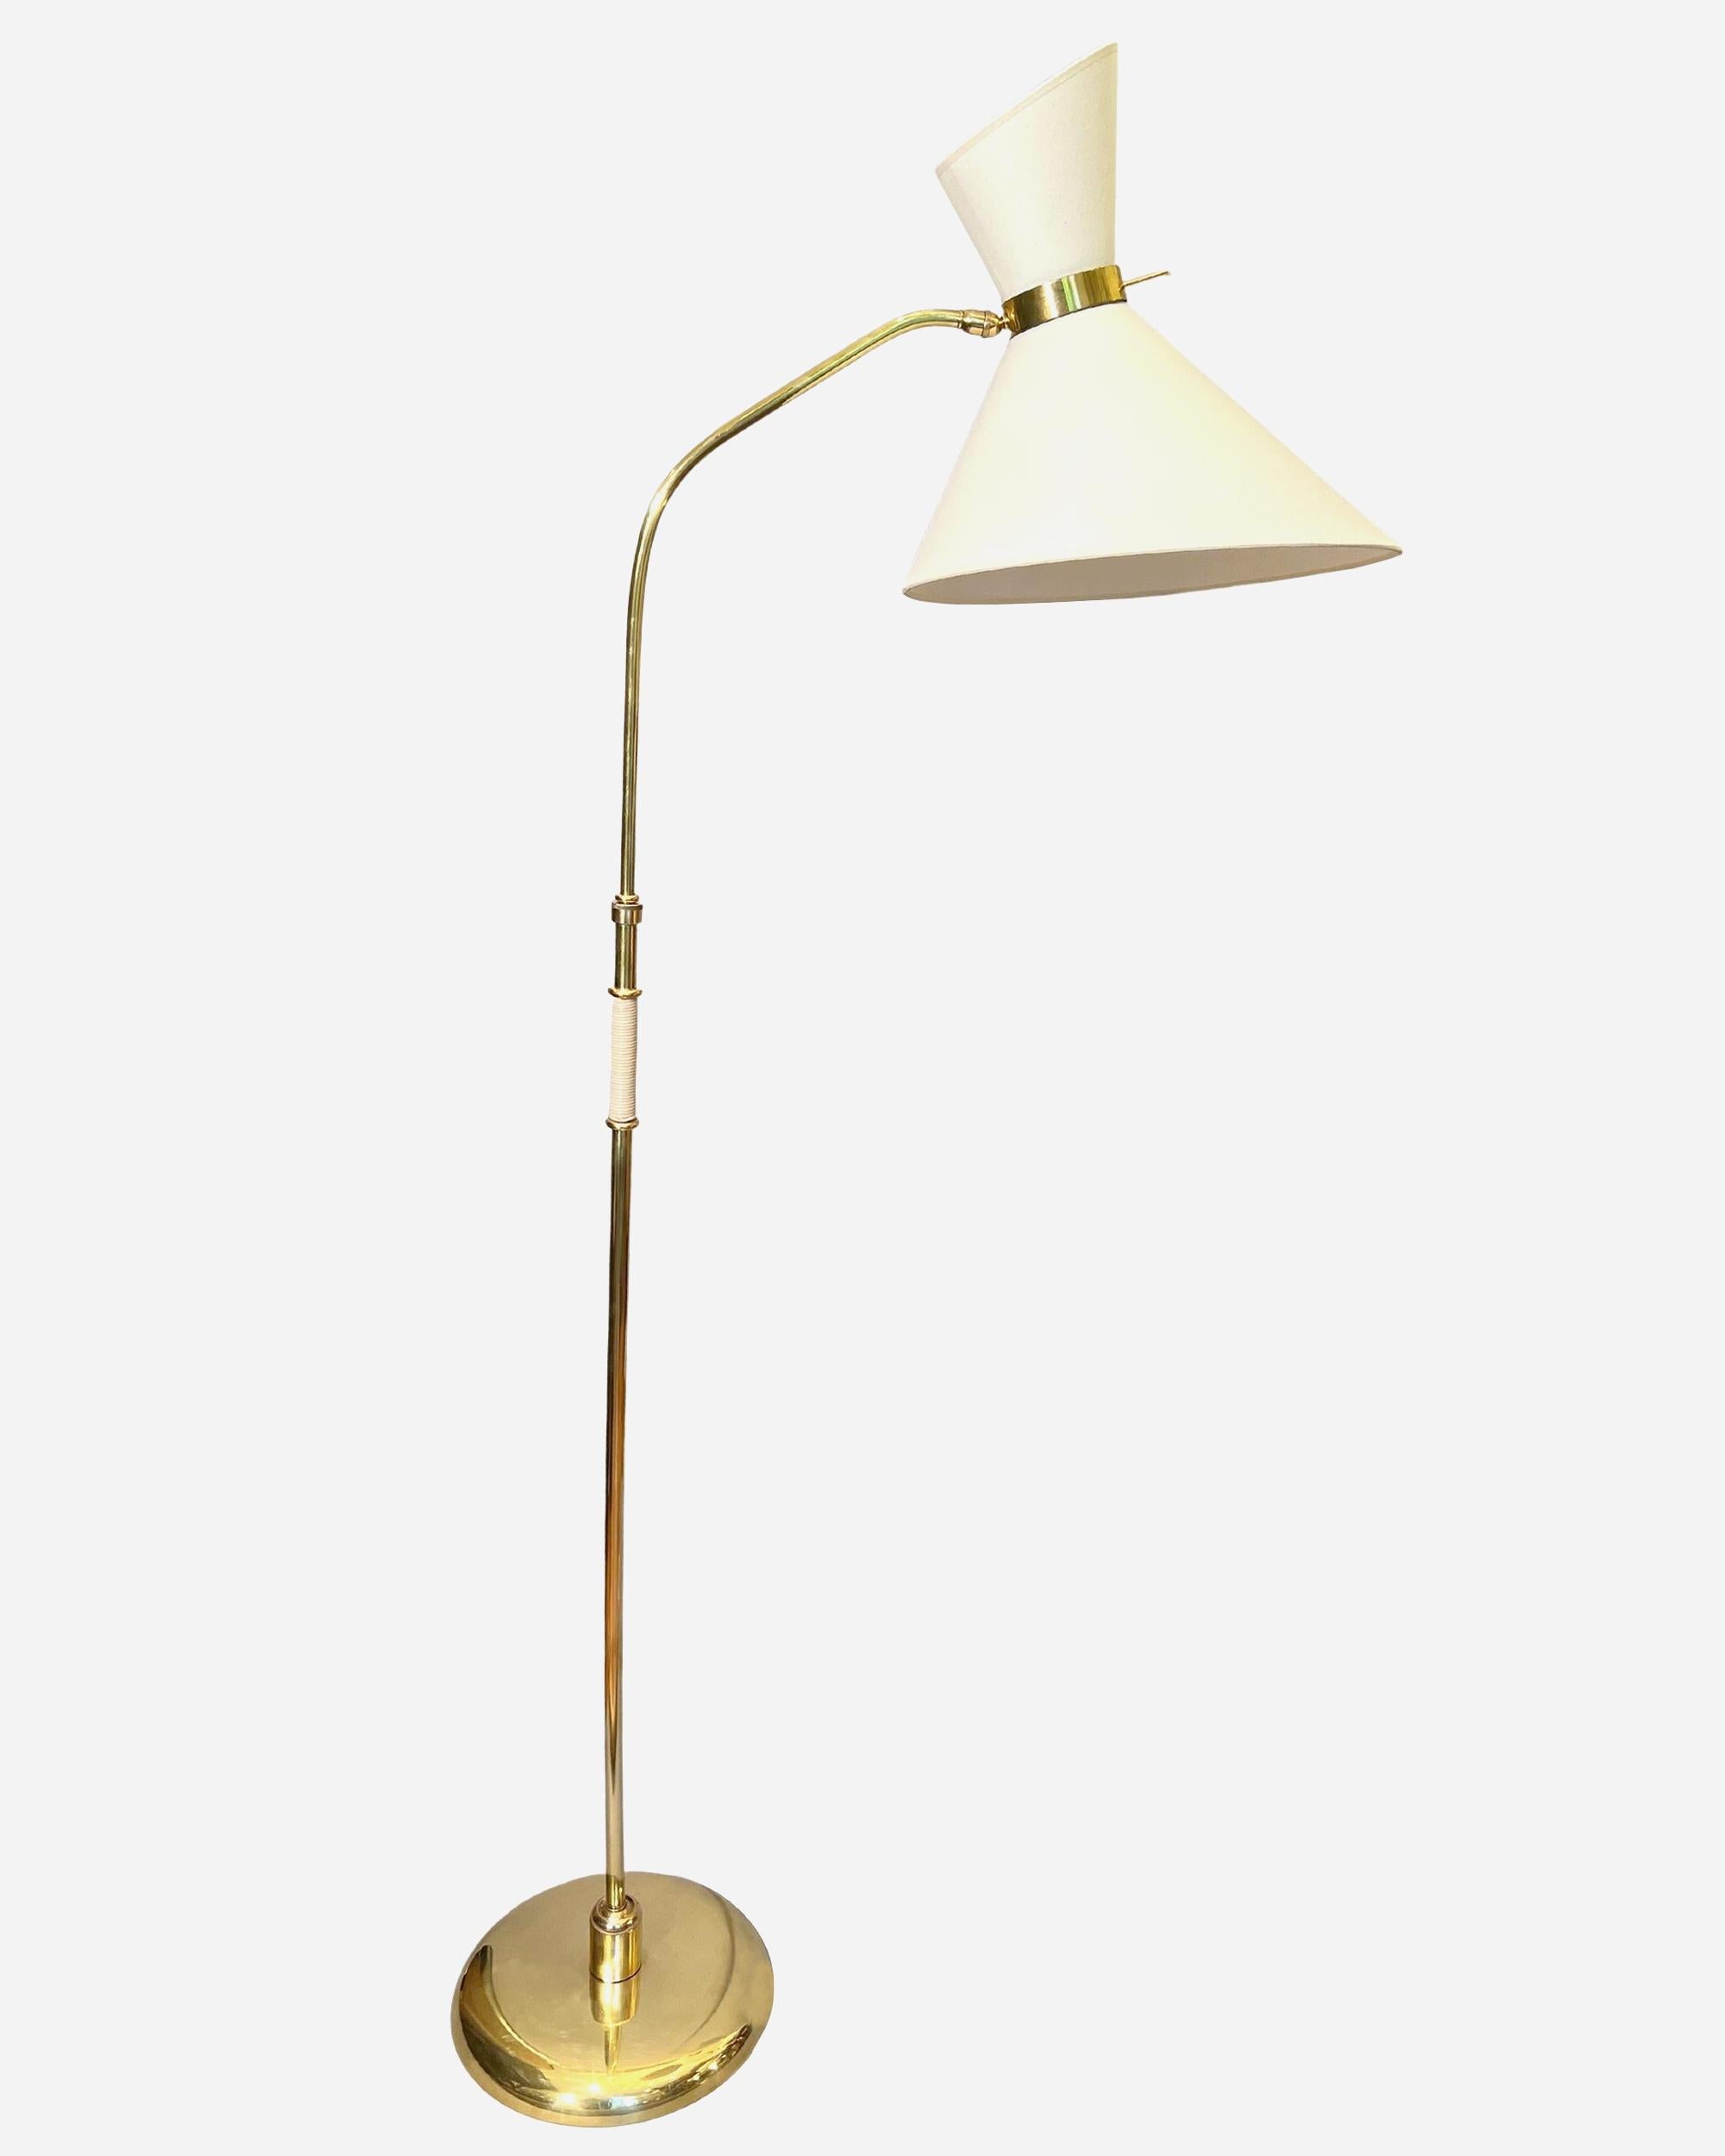 Large extendable and adjustable floor lamp by Maison Lunel, produced between 1950 and 1960.
This floor lamp is made of polished brass, with a large ball-and-socket joint embedded in the base, allowing it to be swivelled in all directions. The